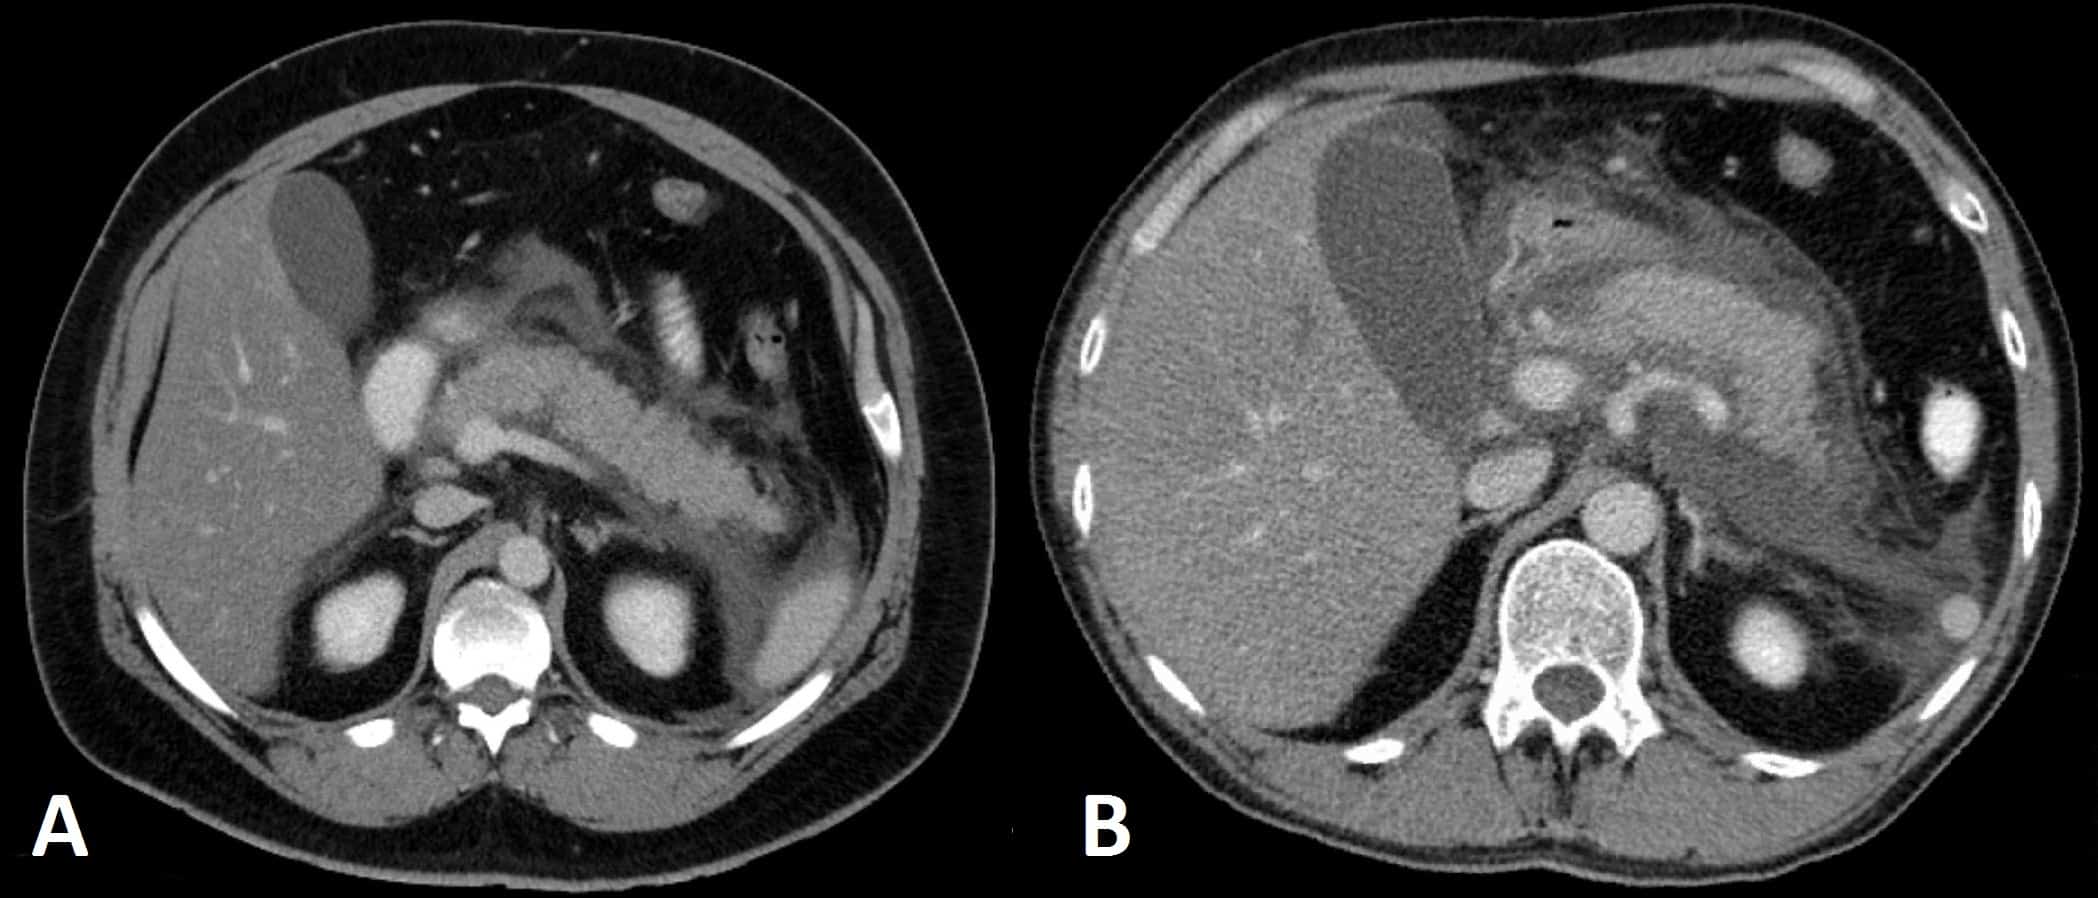 Fig 2 - Pancreatitis on Axial CT Scan (A) Localised oedema around the pancreas (B) Extensive fluid collections around the pancreas